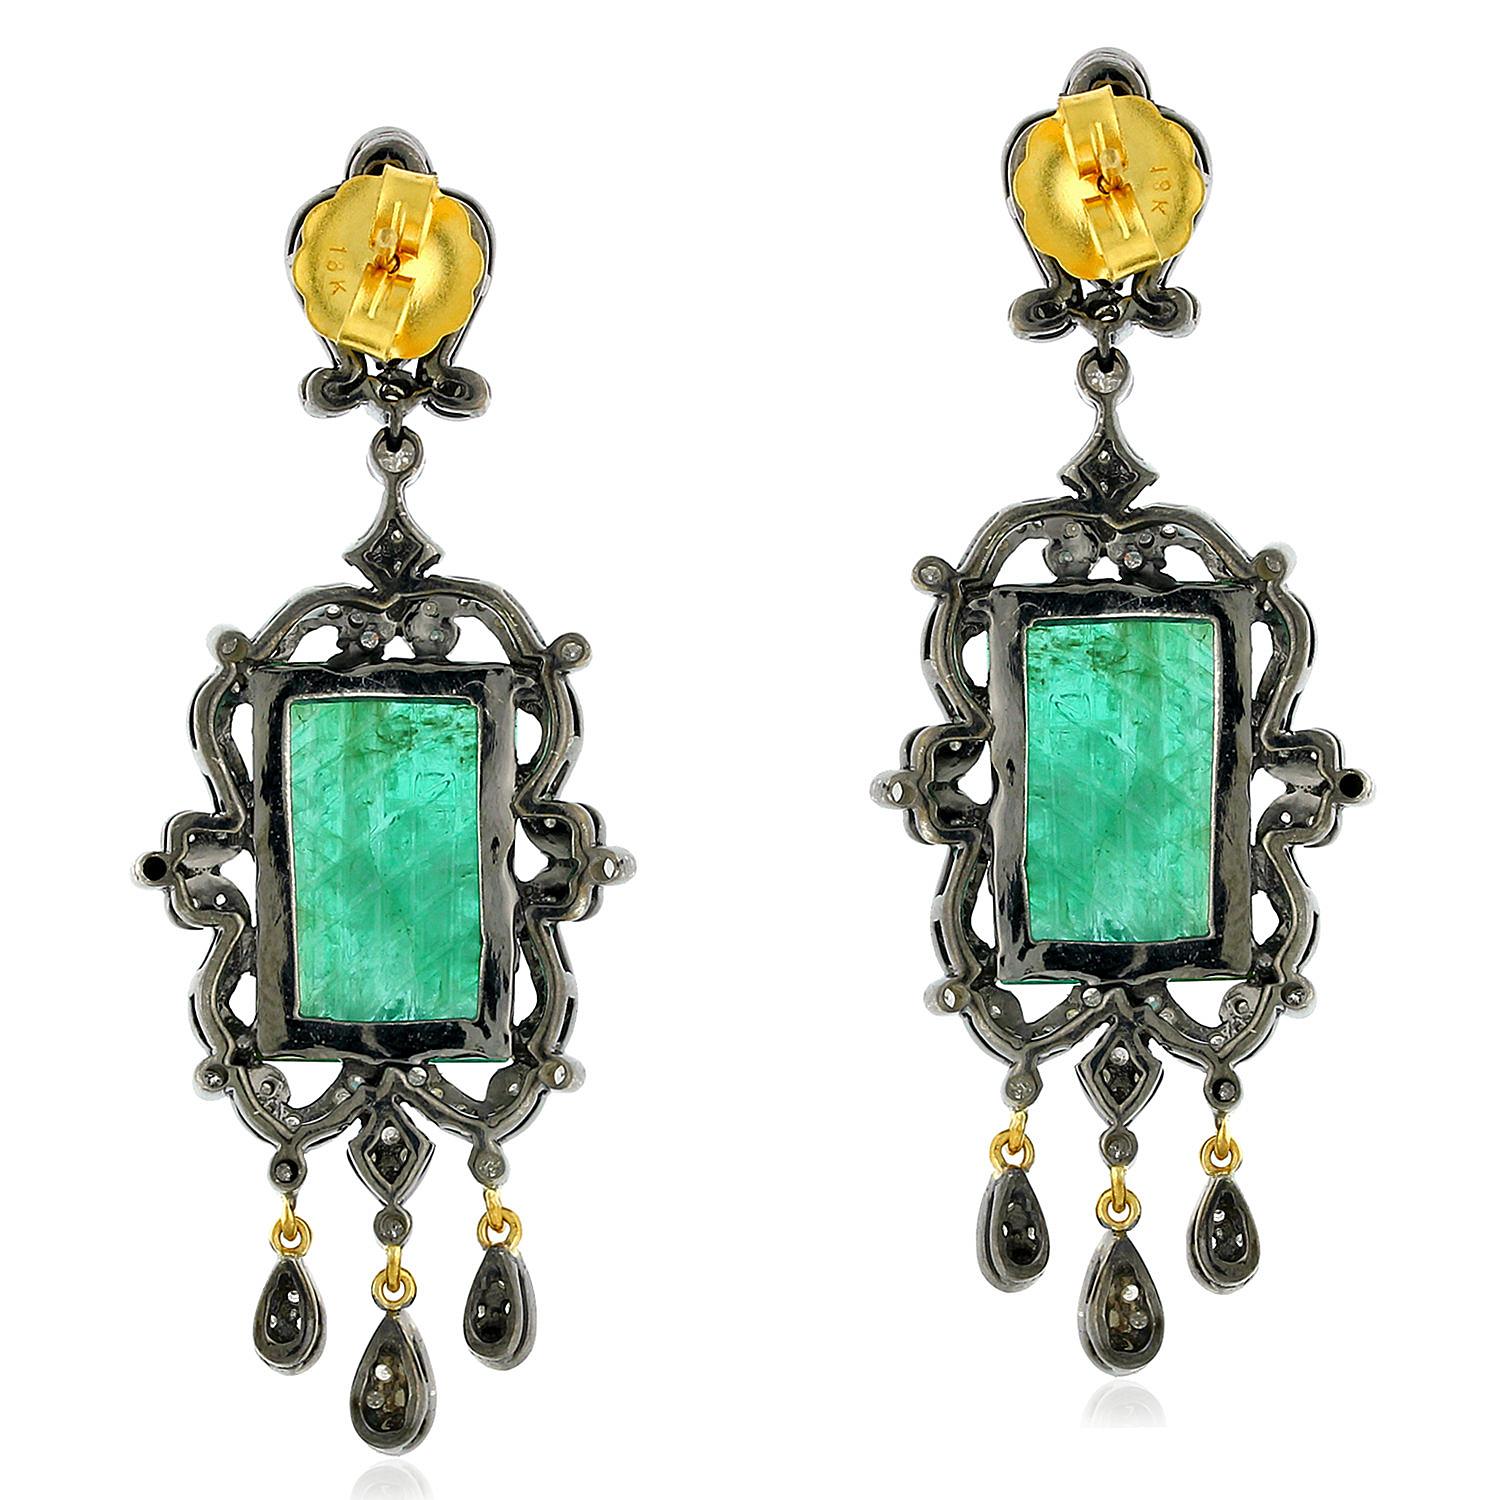 baroque style women's earrings made of sterling silver and 24 carat